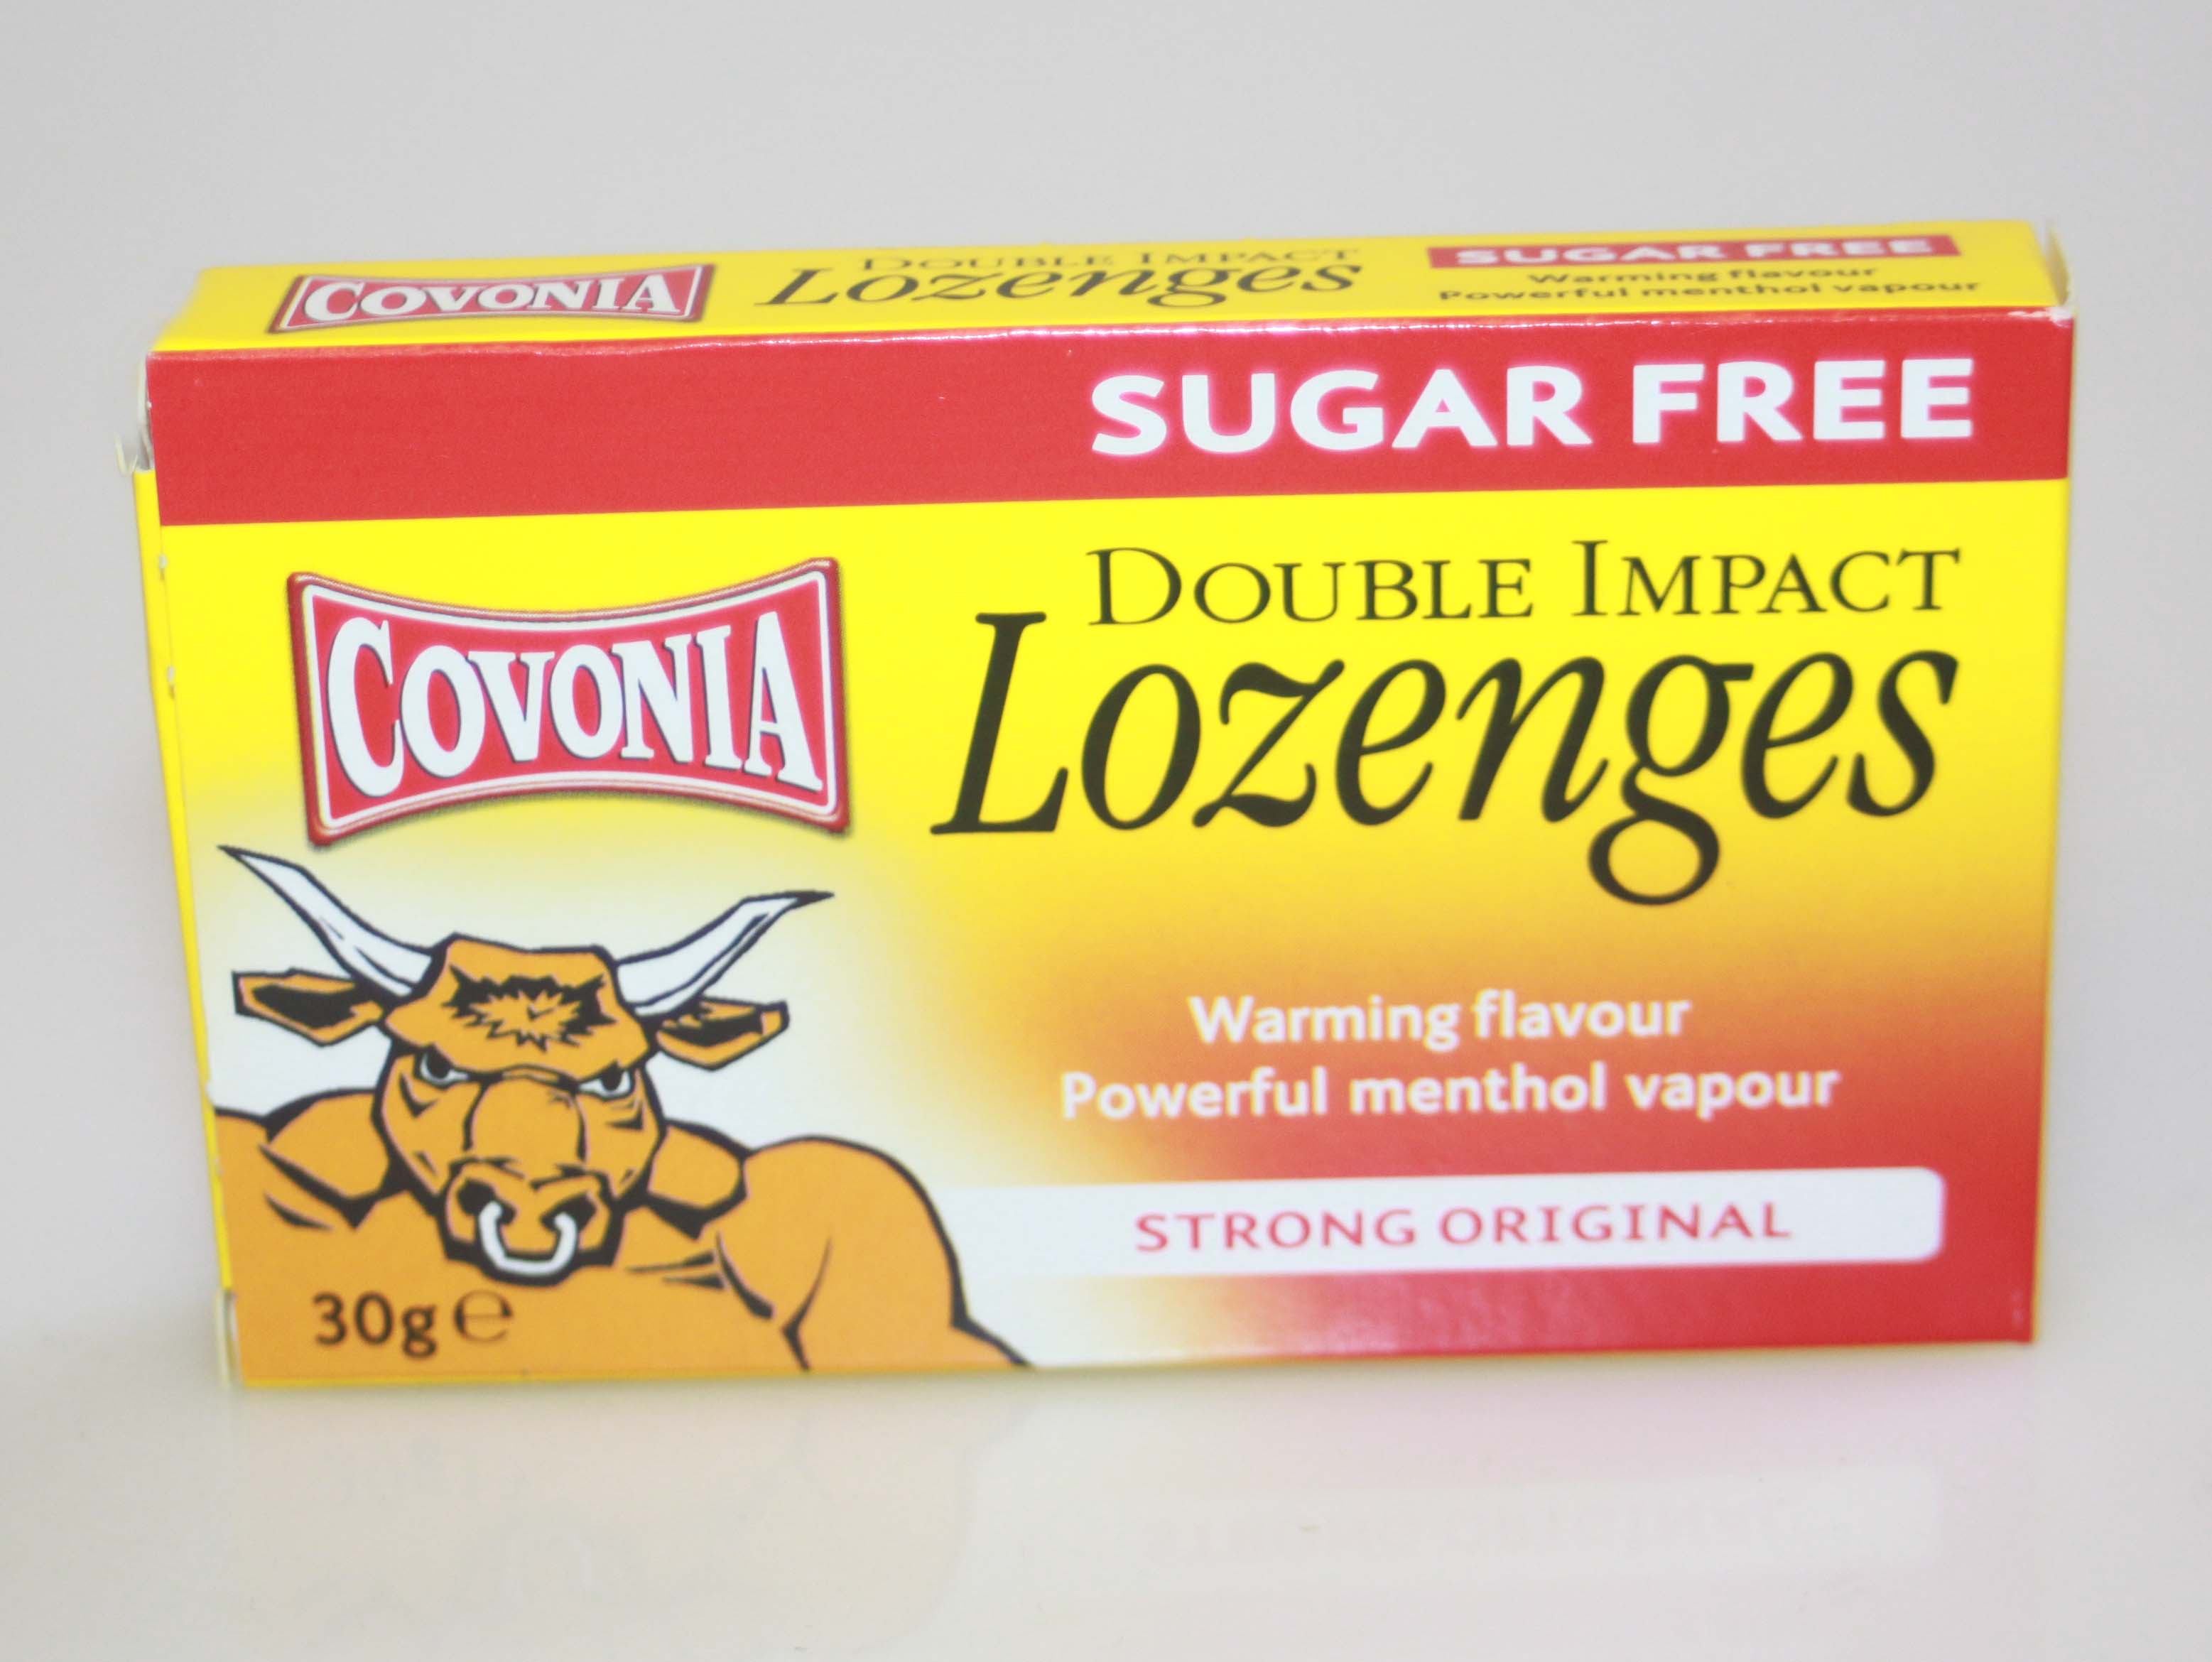 Covonia Double Impact Lozenges Sugar Free - 30g